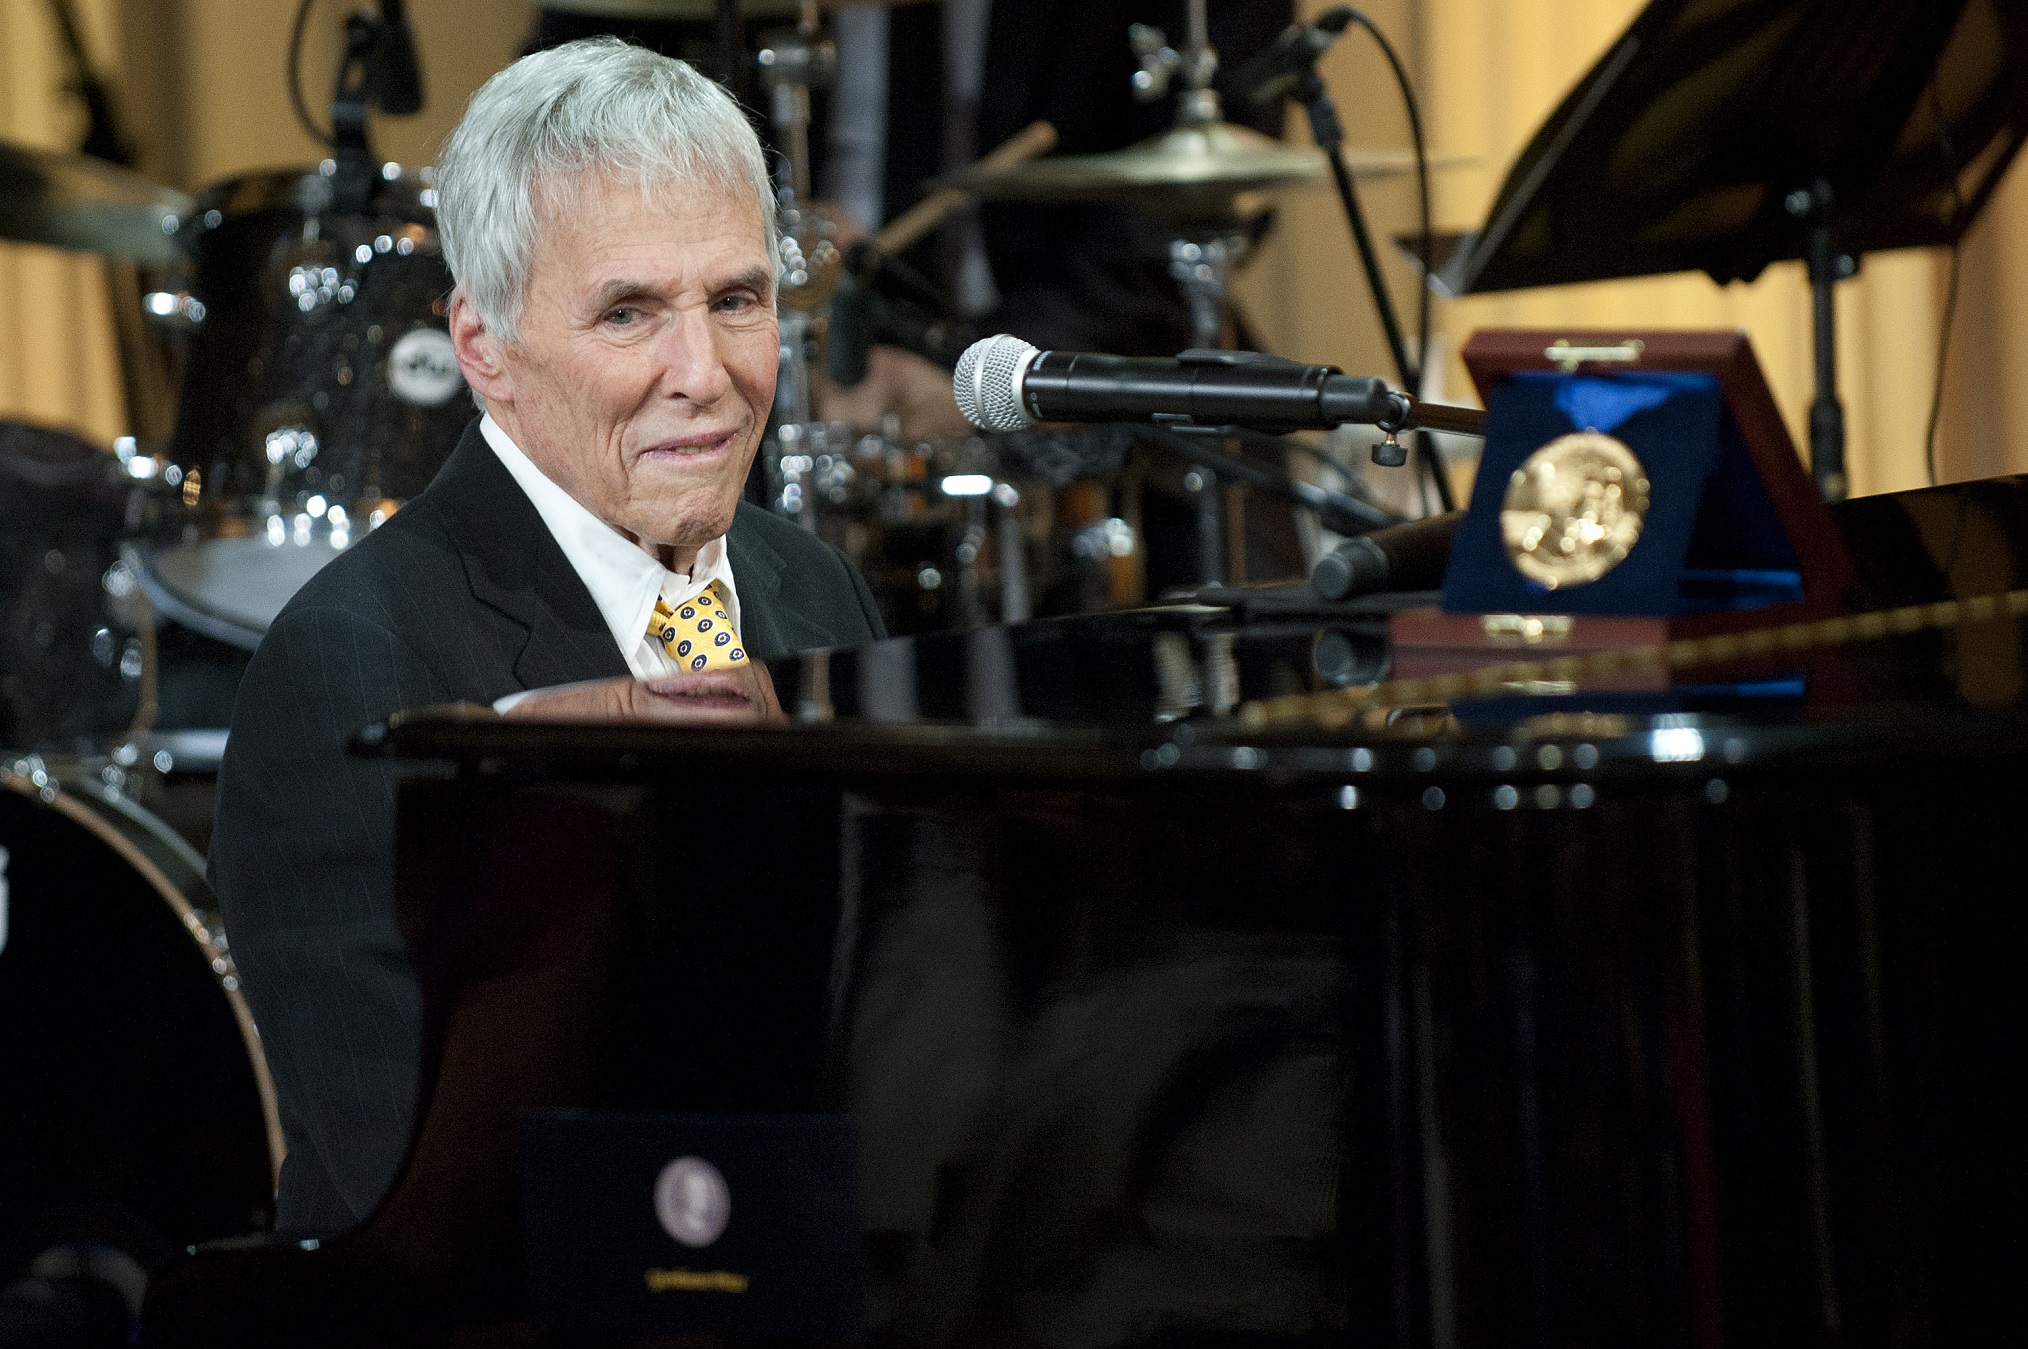 Burt Bacharach Songwriter, Composer, Record Producer, Pianist